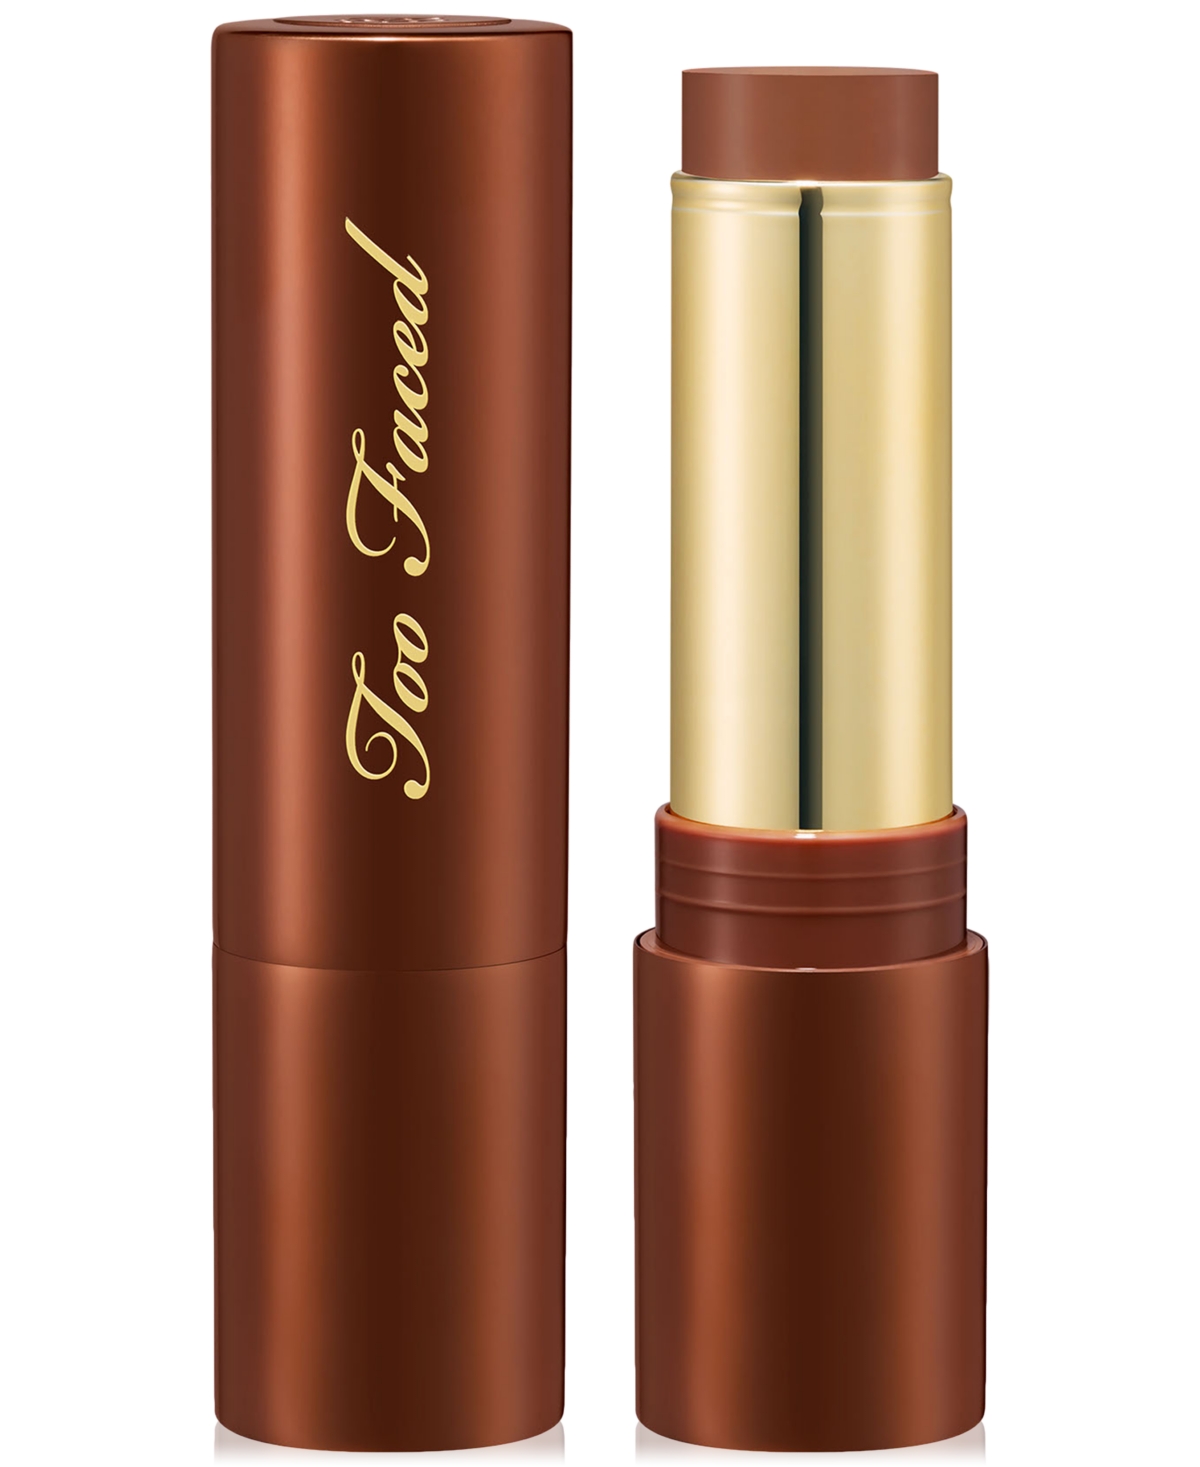 Too Faced Chocolate Soleil Melting Bronzing & Sculpting Stick In Chocolate Caramel